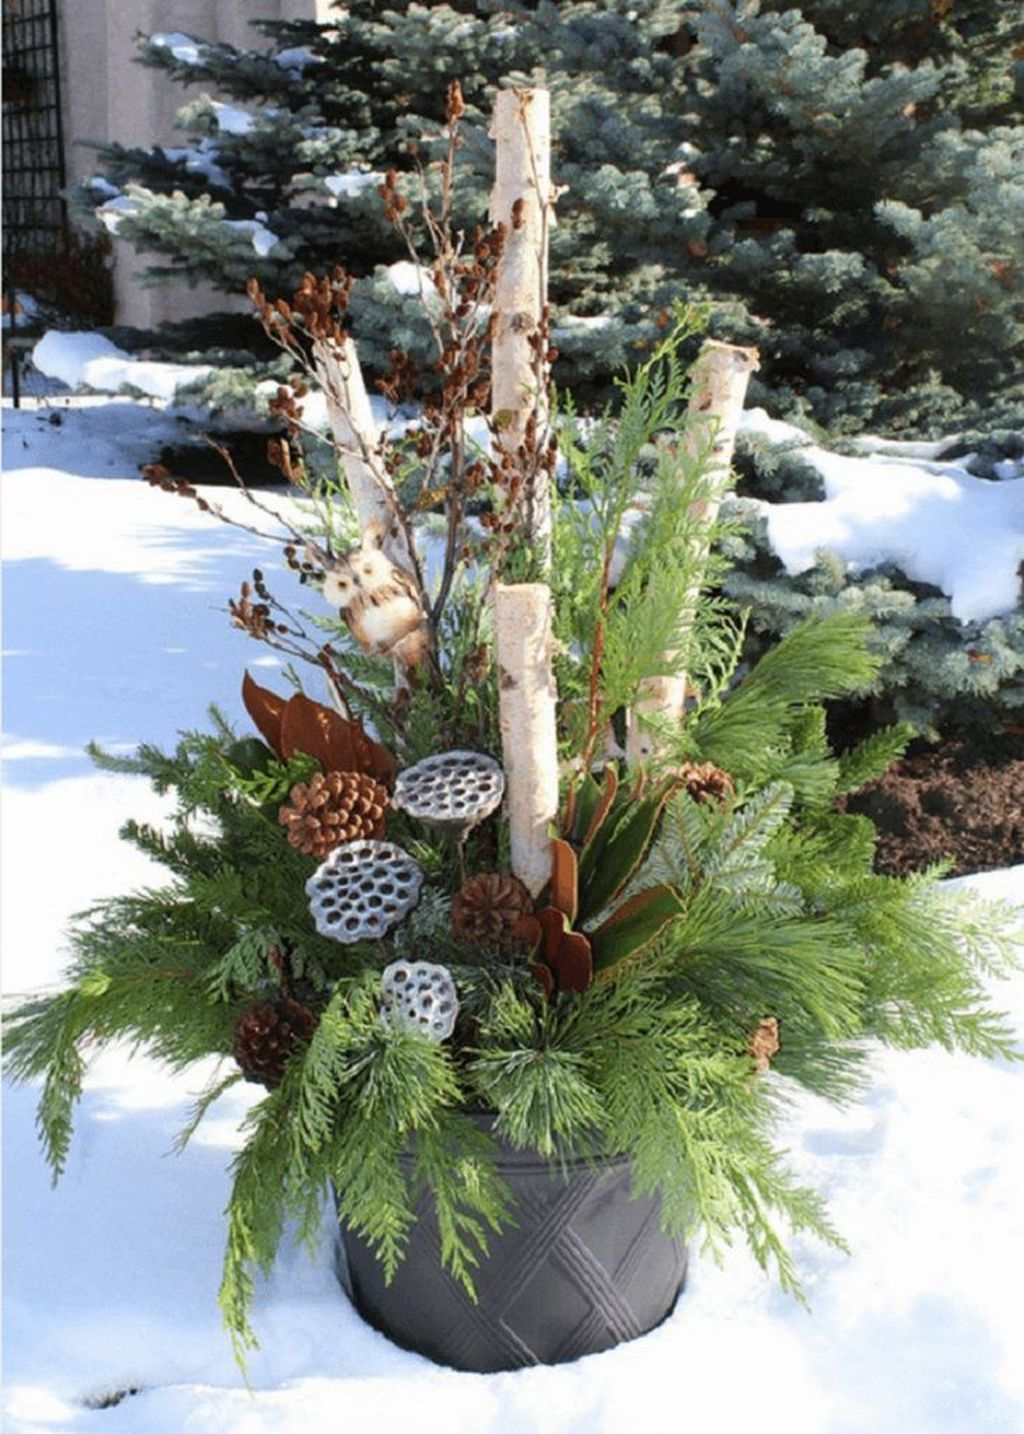 Marvelous Outdoor Holiday Planter Ideas To Beauty Porch Décor 11